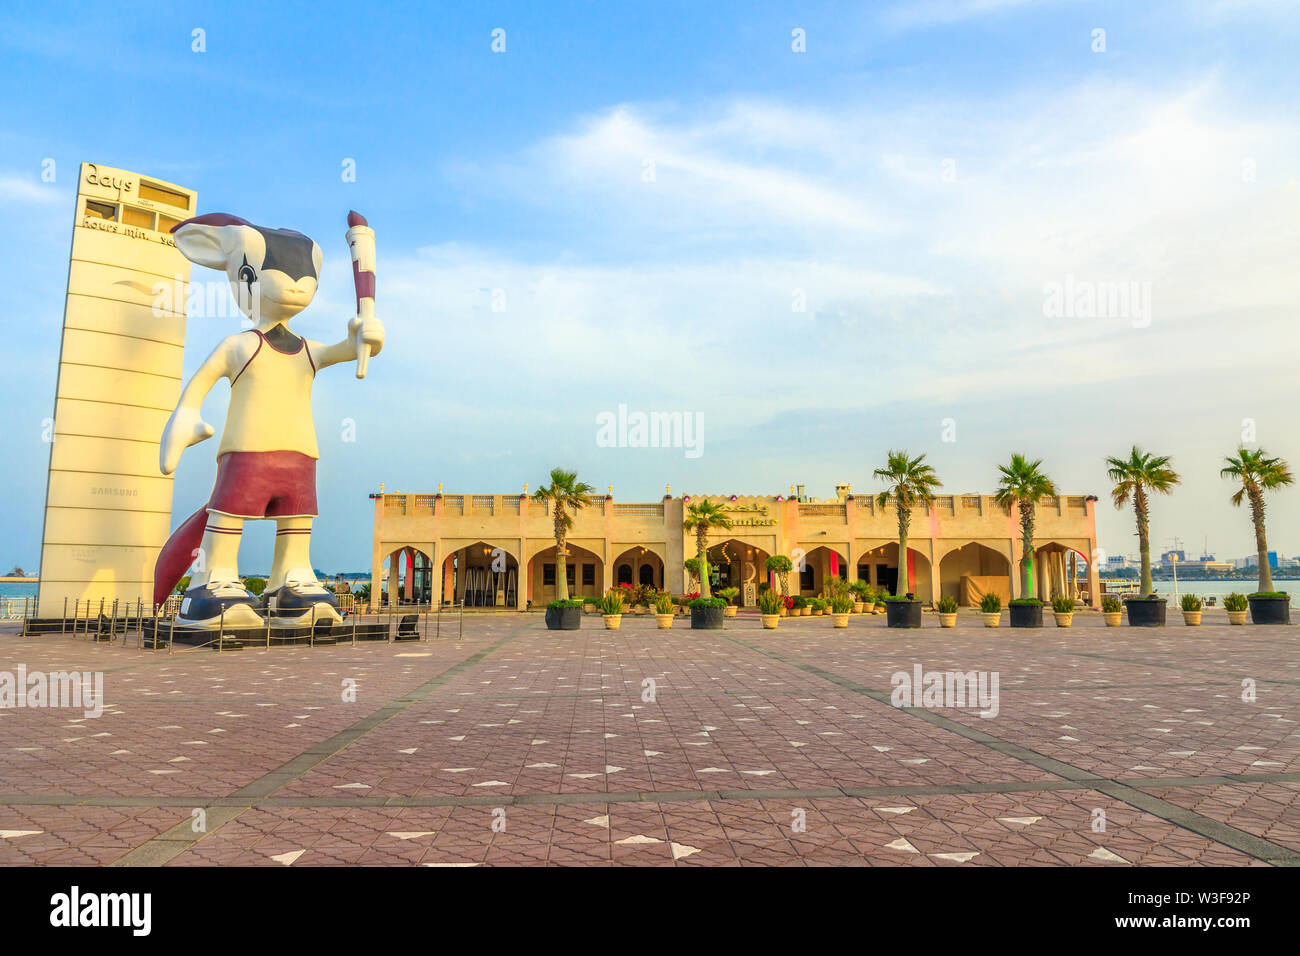 Doha, Qatar - February 23, 2019: Giant statue of Orry The Oryx, mascot of the Asian Games 2006 along the Corniche close to Al Mourjan luxury Stock Photo